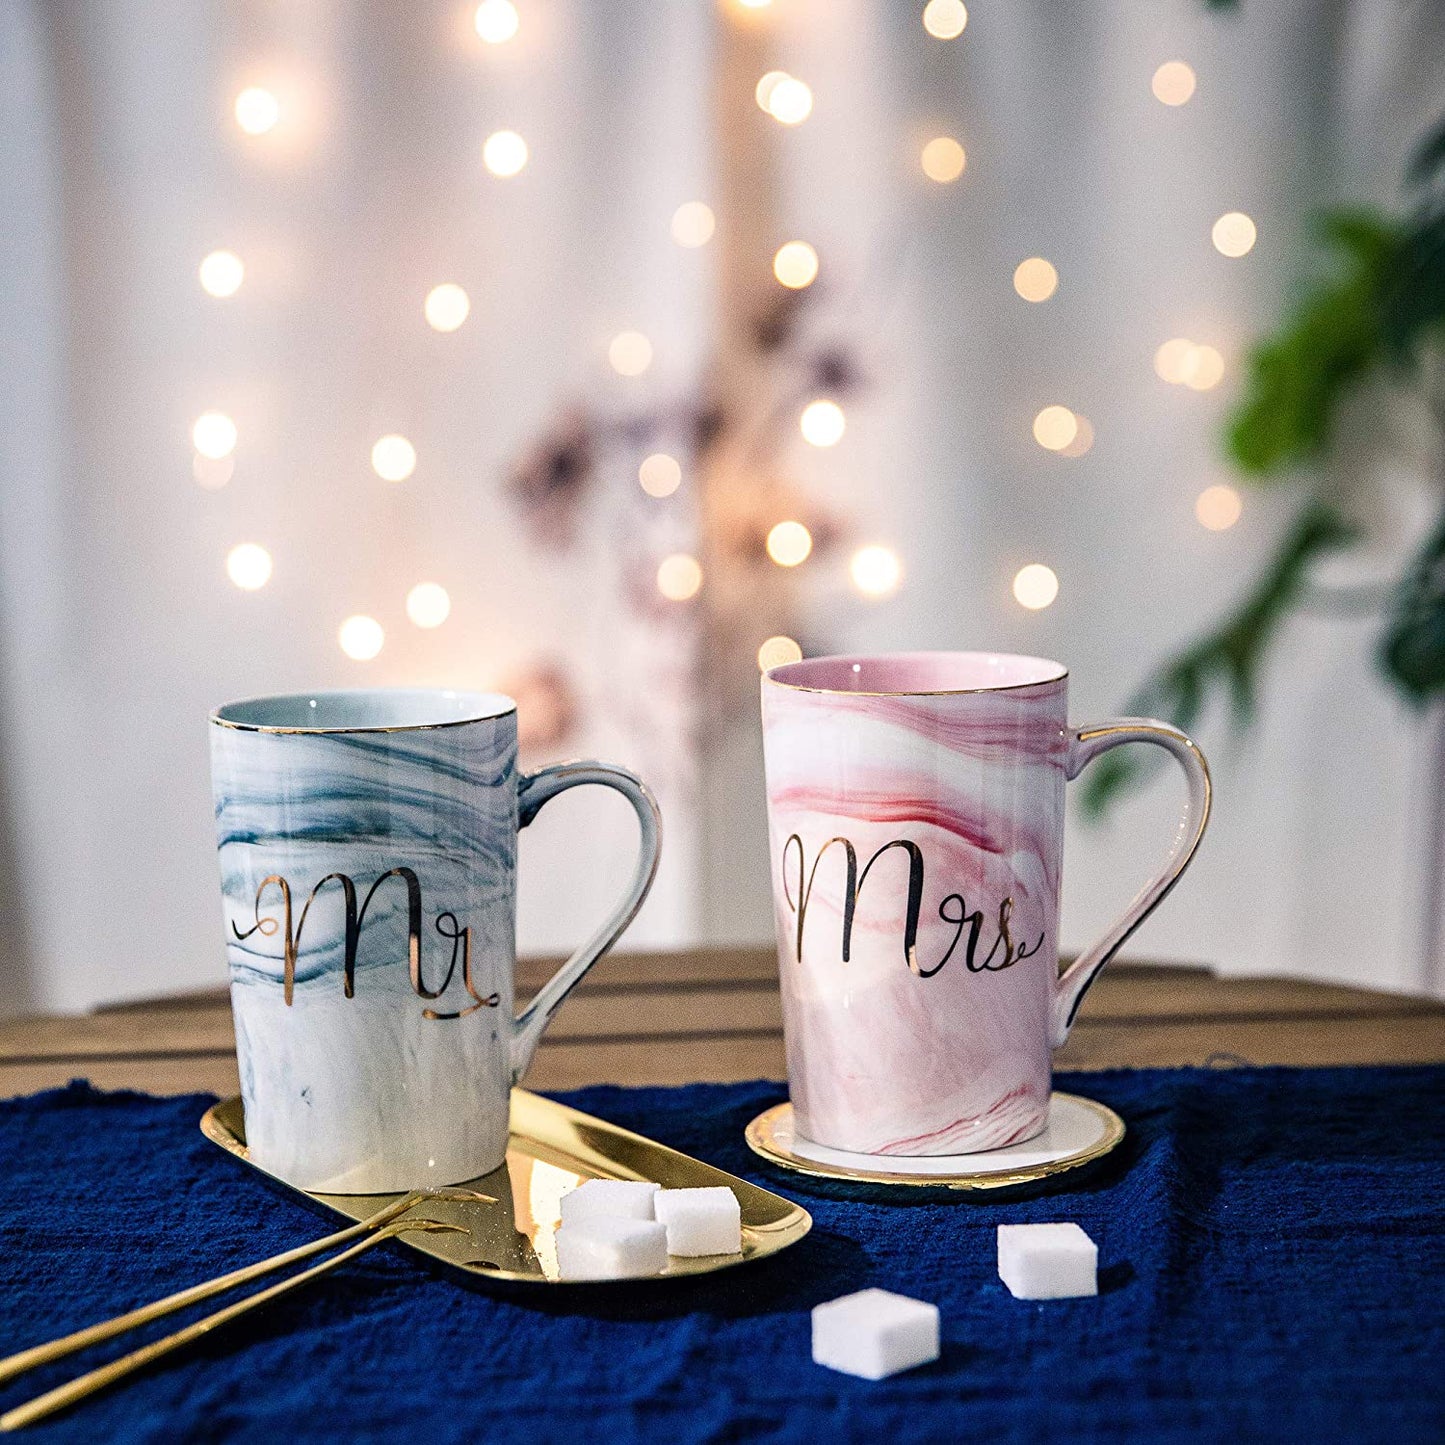 Mr and Mrs Coffee Mugs - Wedding Gifts for Bride and Groom - Gifts for Bridal Shower Engagement Wedding and Married Couples Anniversary - Ceramic Marble Cups 14 Oz Pink